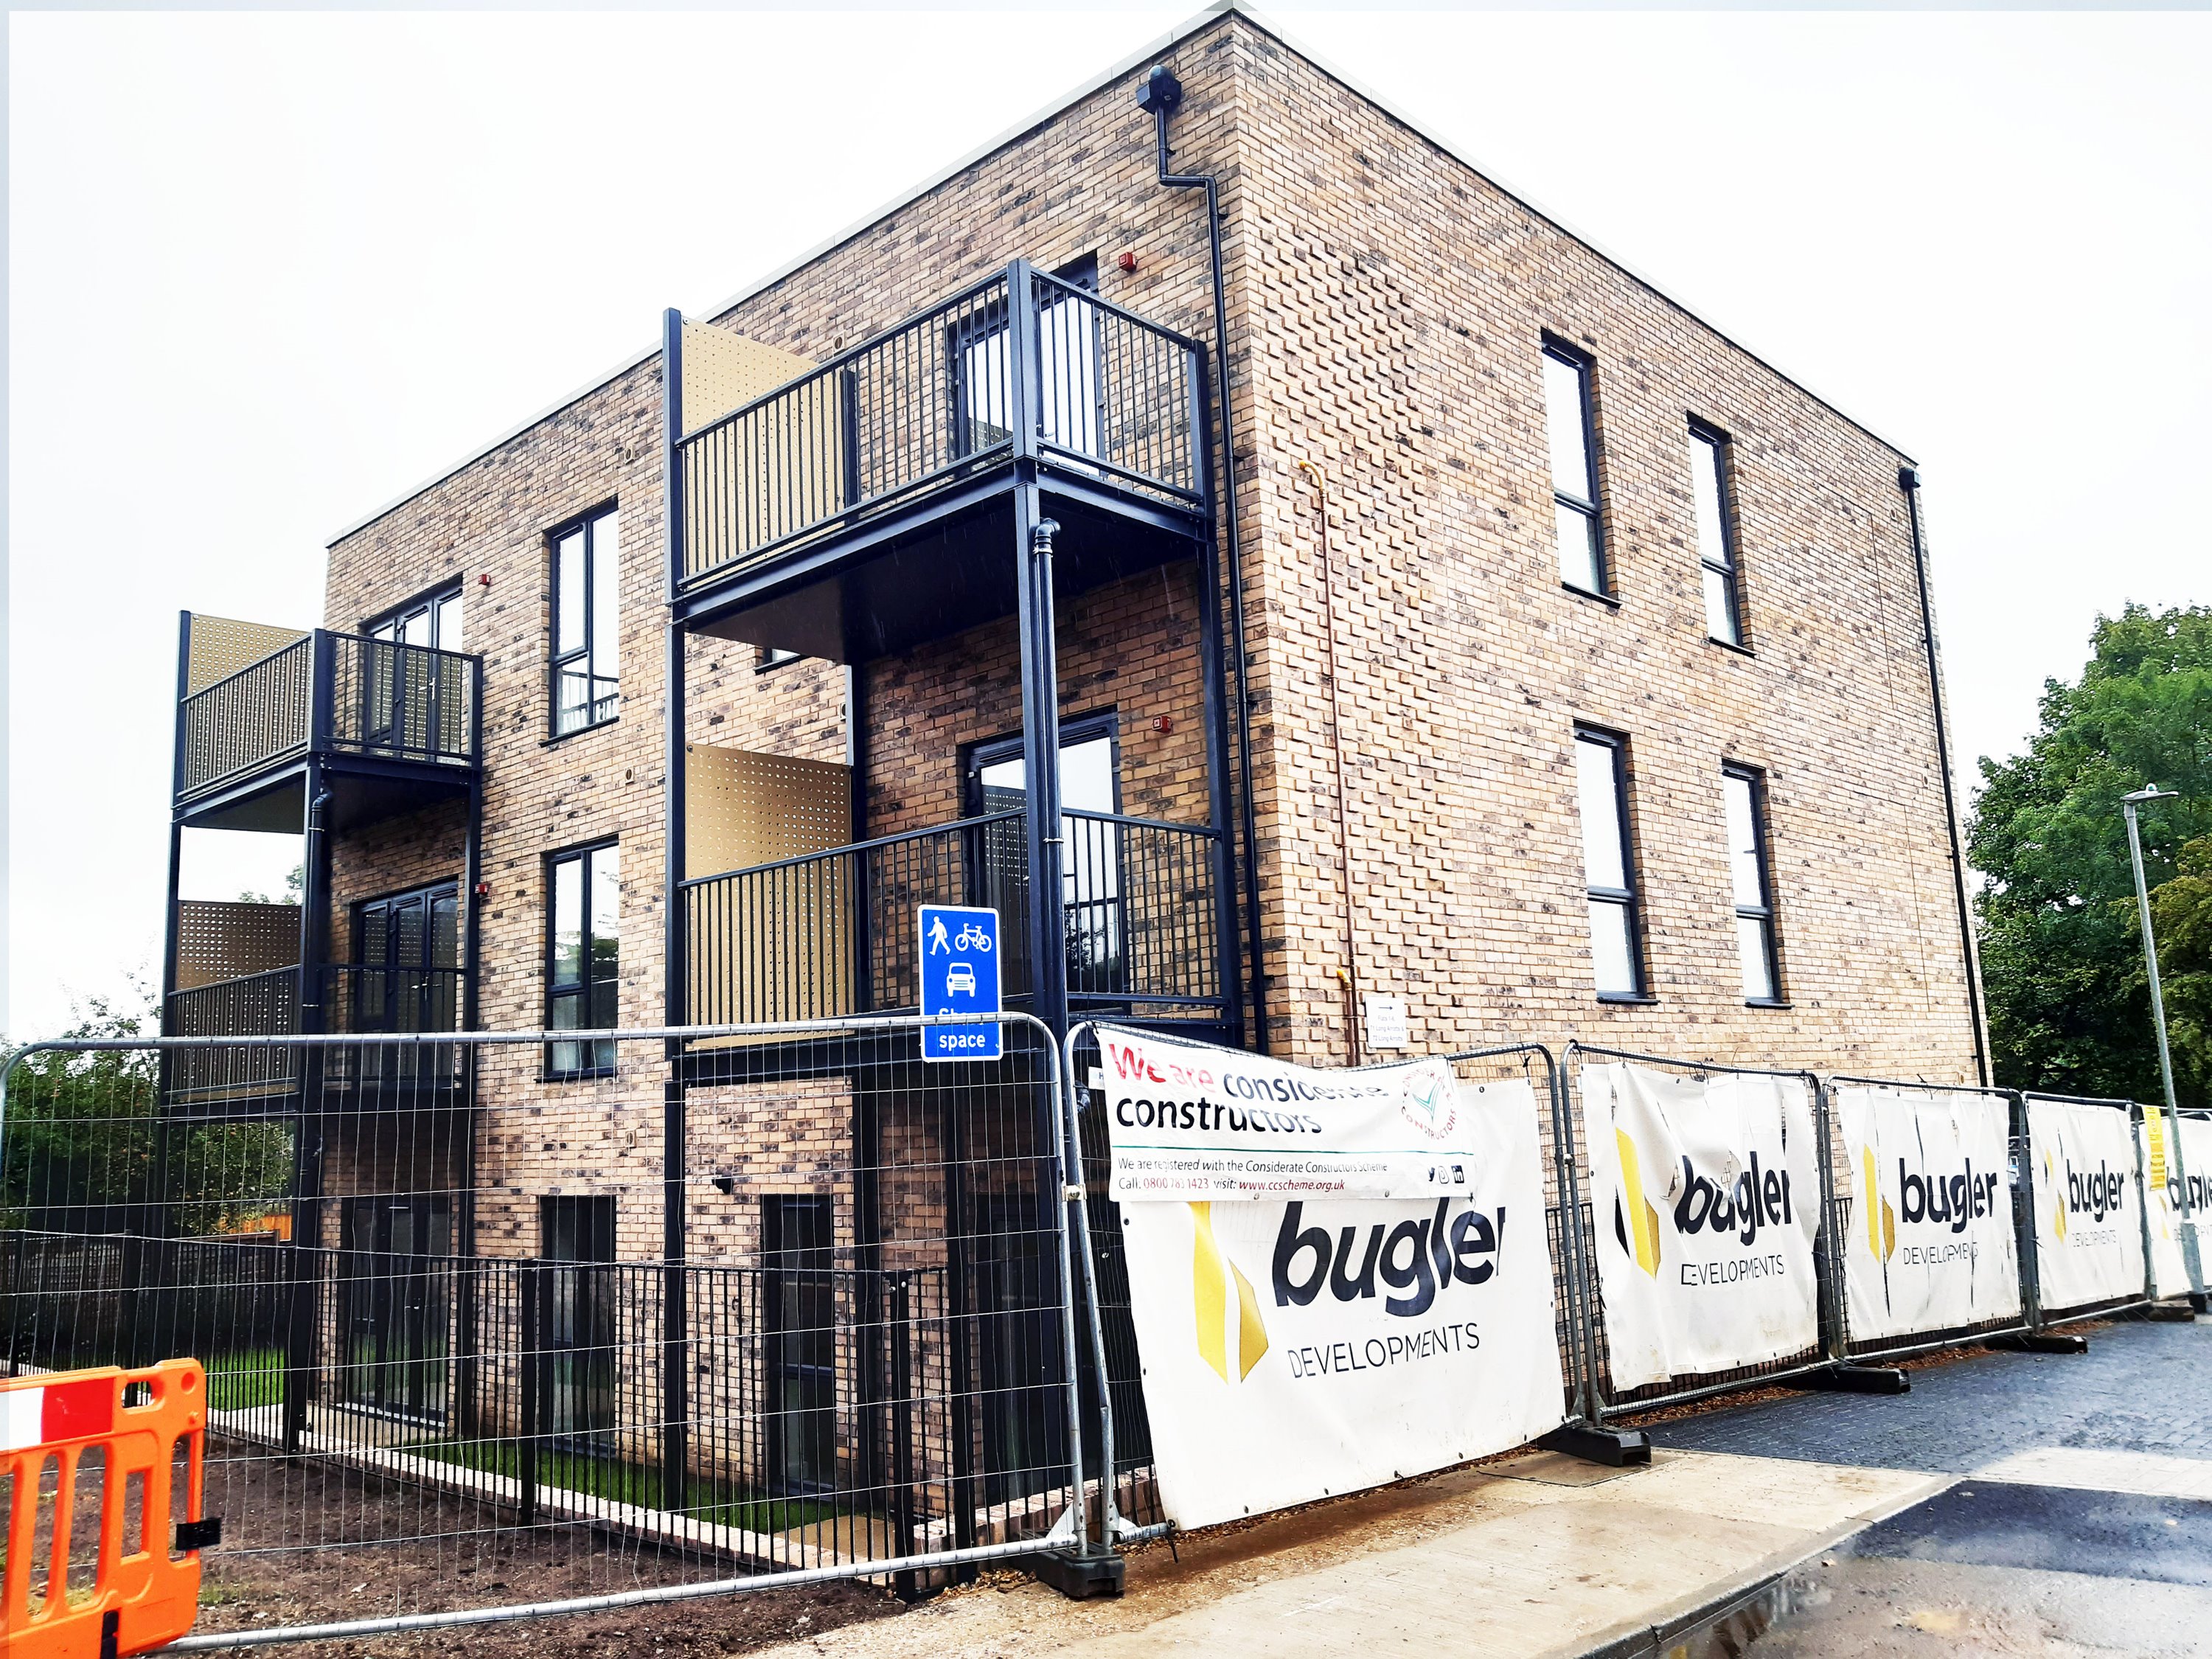 Our latest partnership bringing new homes for affordable rent